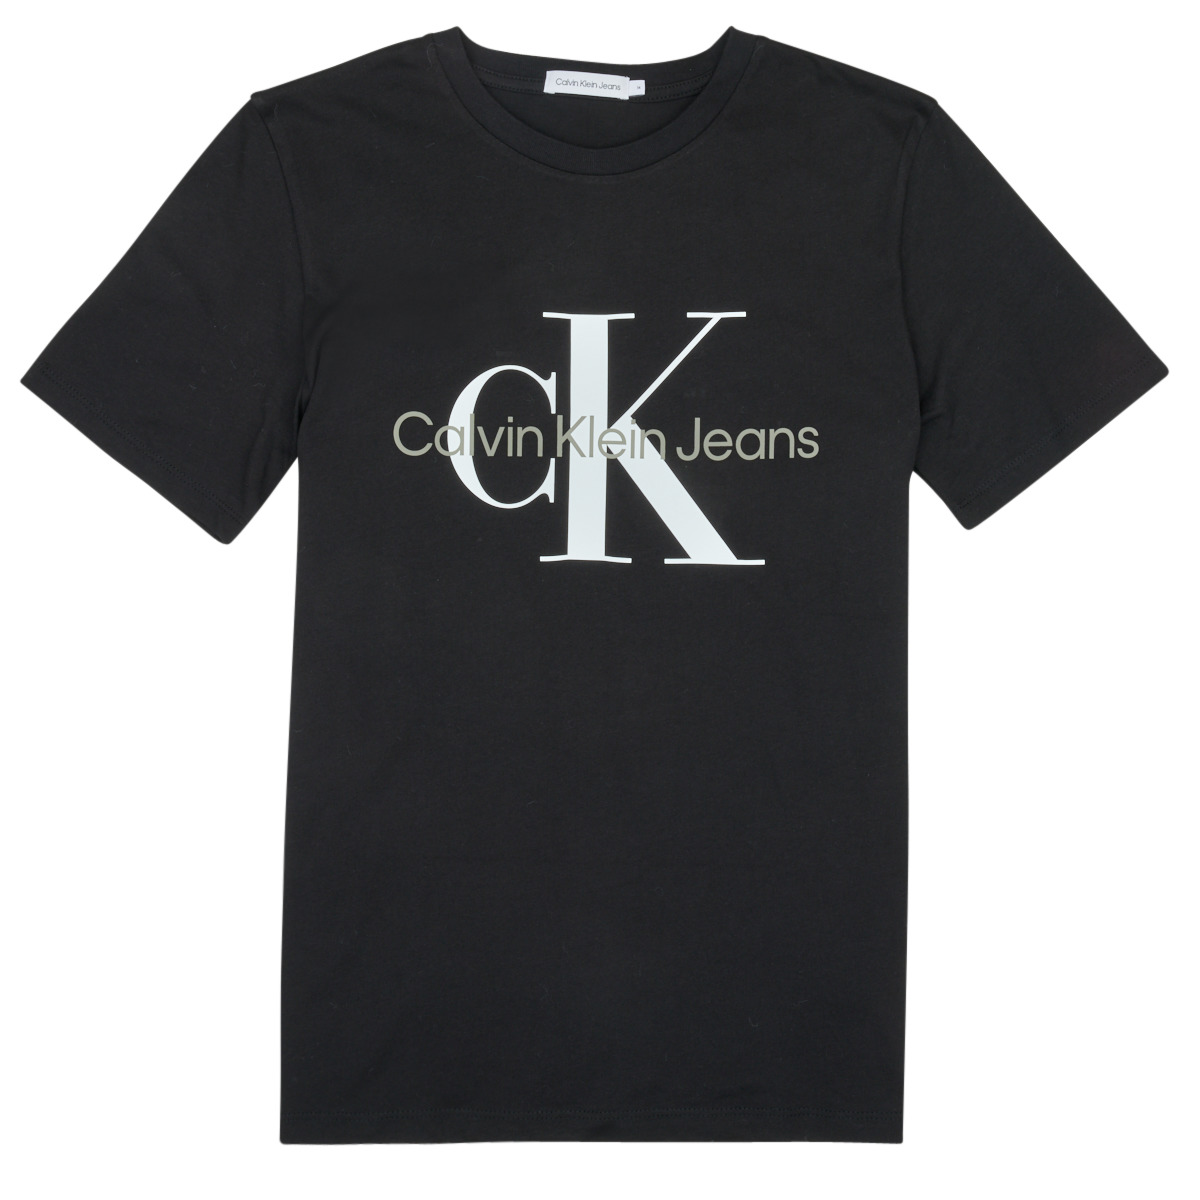 Calvin ! t-shirts T-SHIRT - Spartoo Klein Jeans LOGO delivery short-sleeved NET Clothing Free - Child | MONOGRAM Black